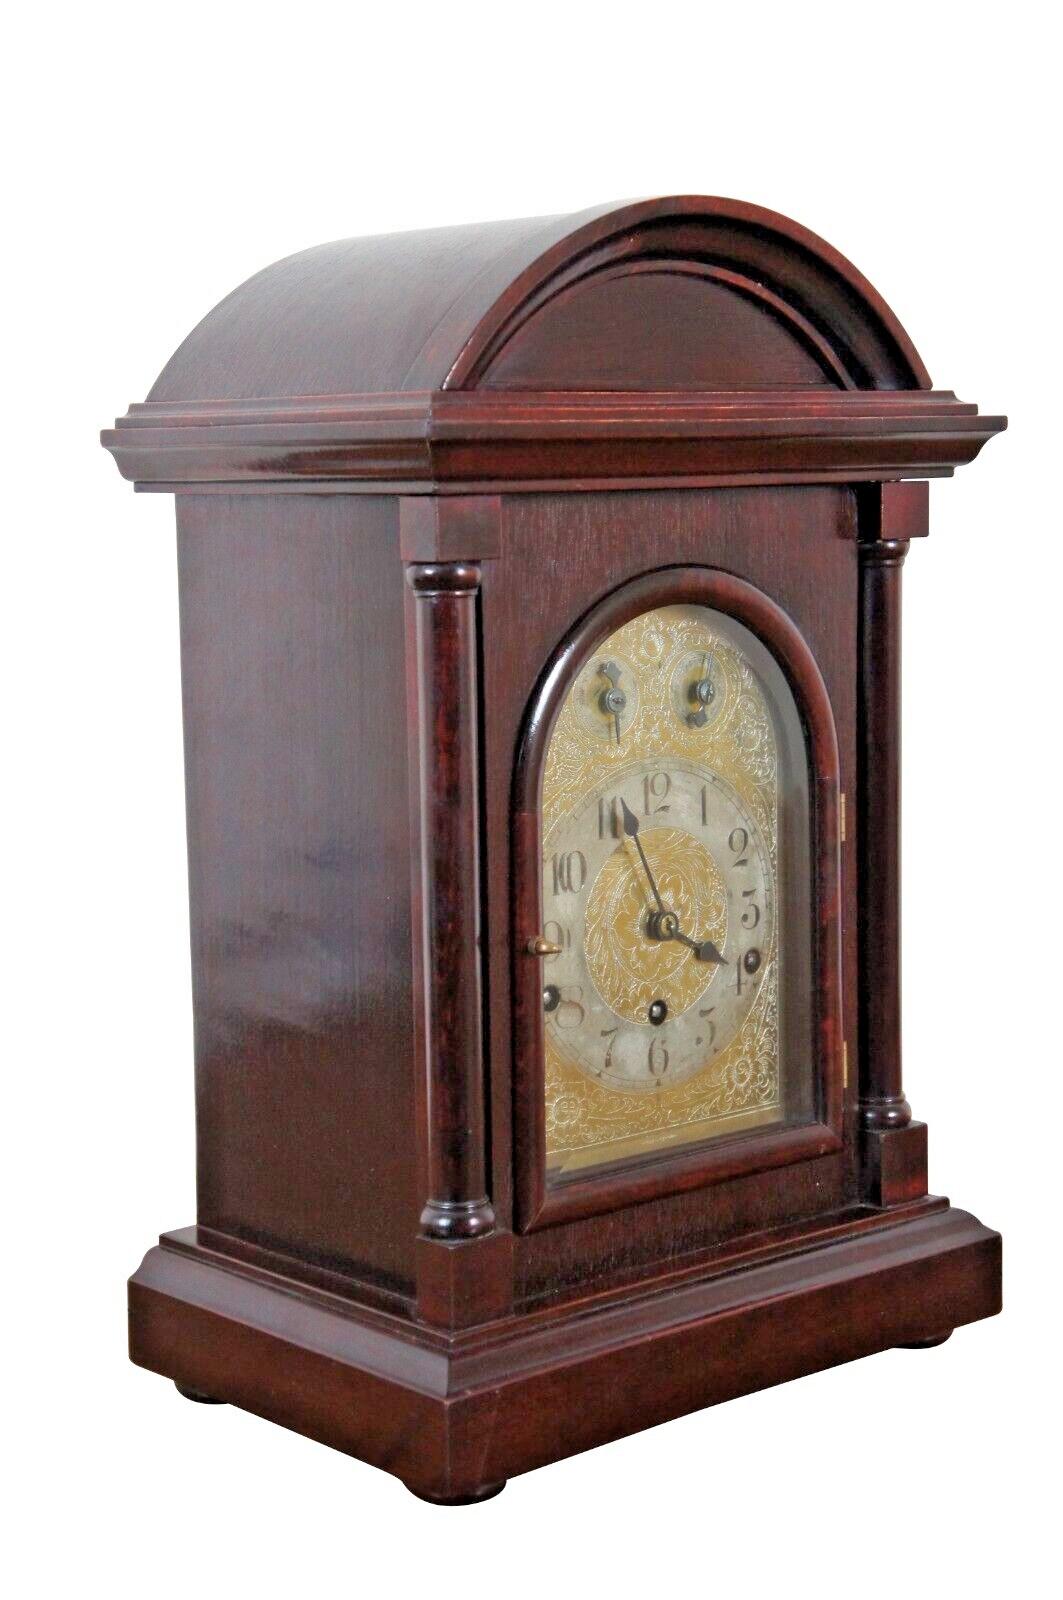 Early 20th Century Kienzle key wound mantel clock with simple neoclassical mahogany case and floral etched brass face including controls for speed and chime above the clockface. Arabic numerals. Westminster chimes. Works numbered 60782. Made in